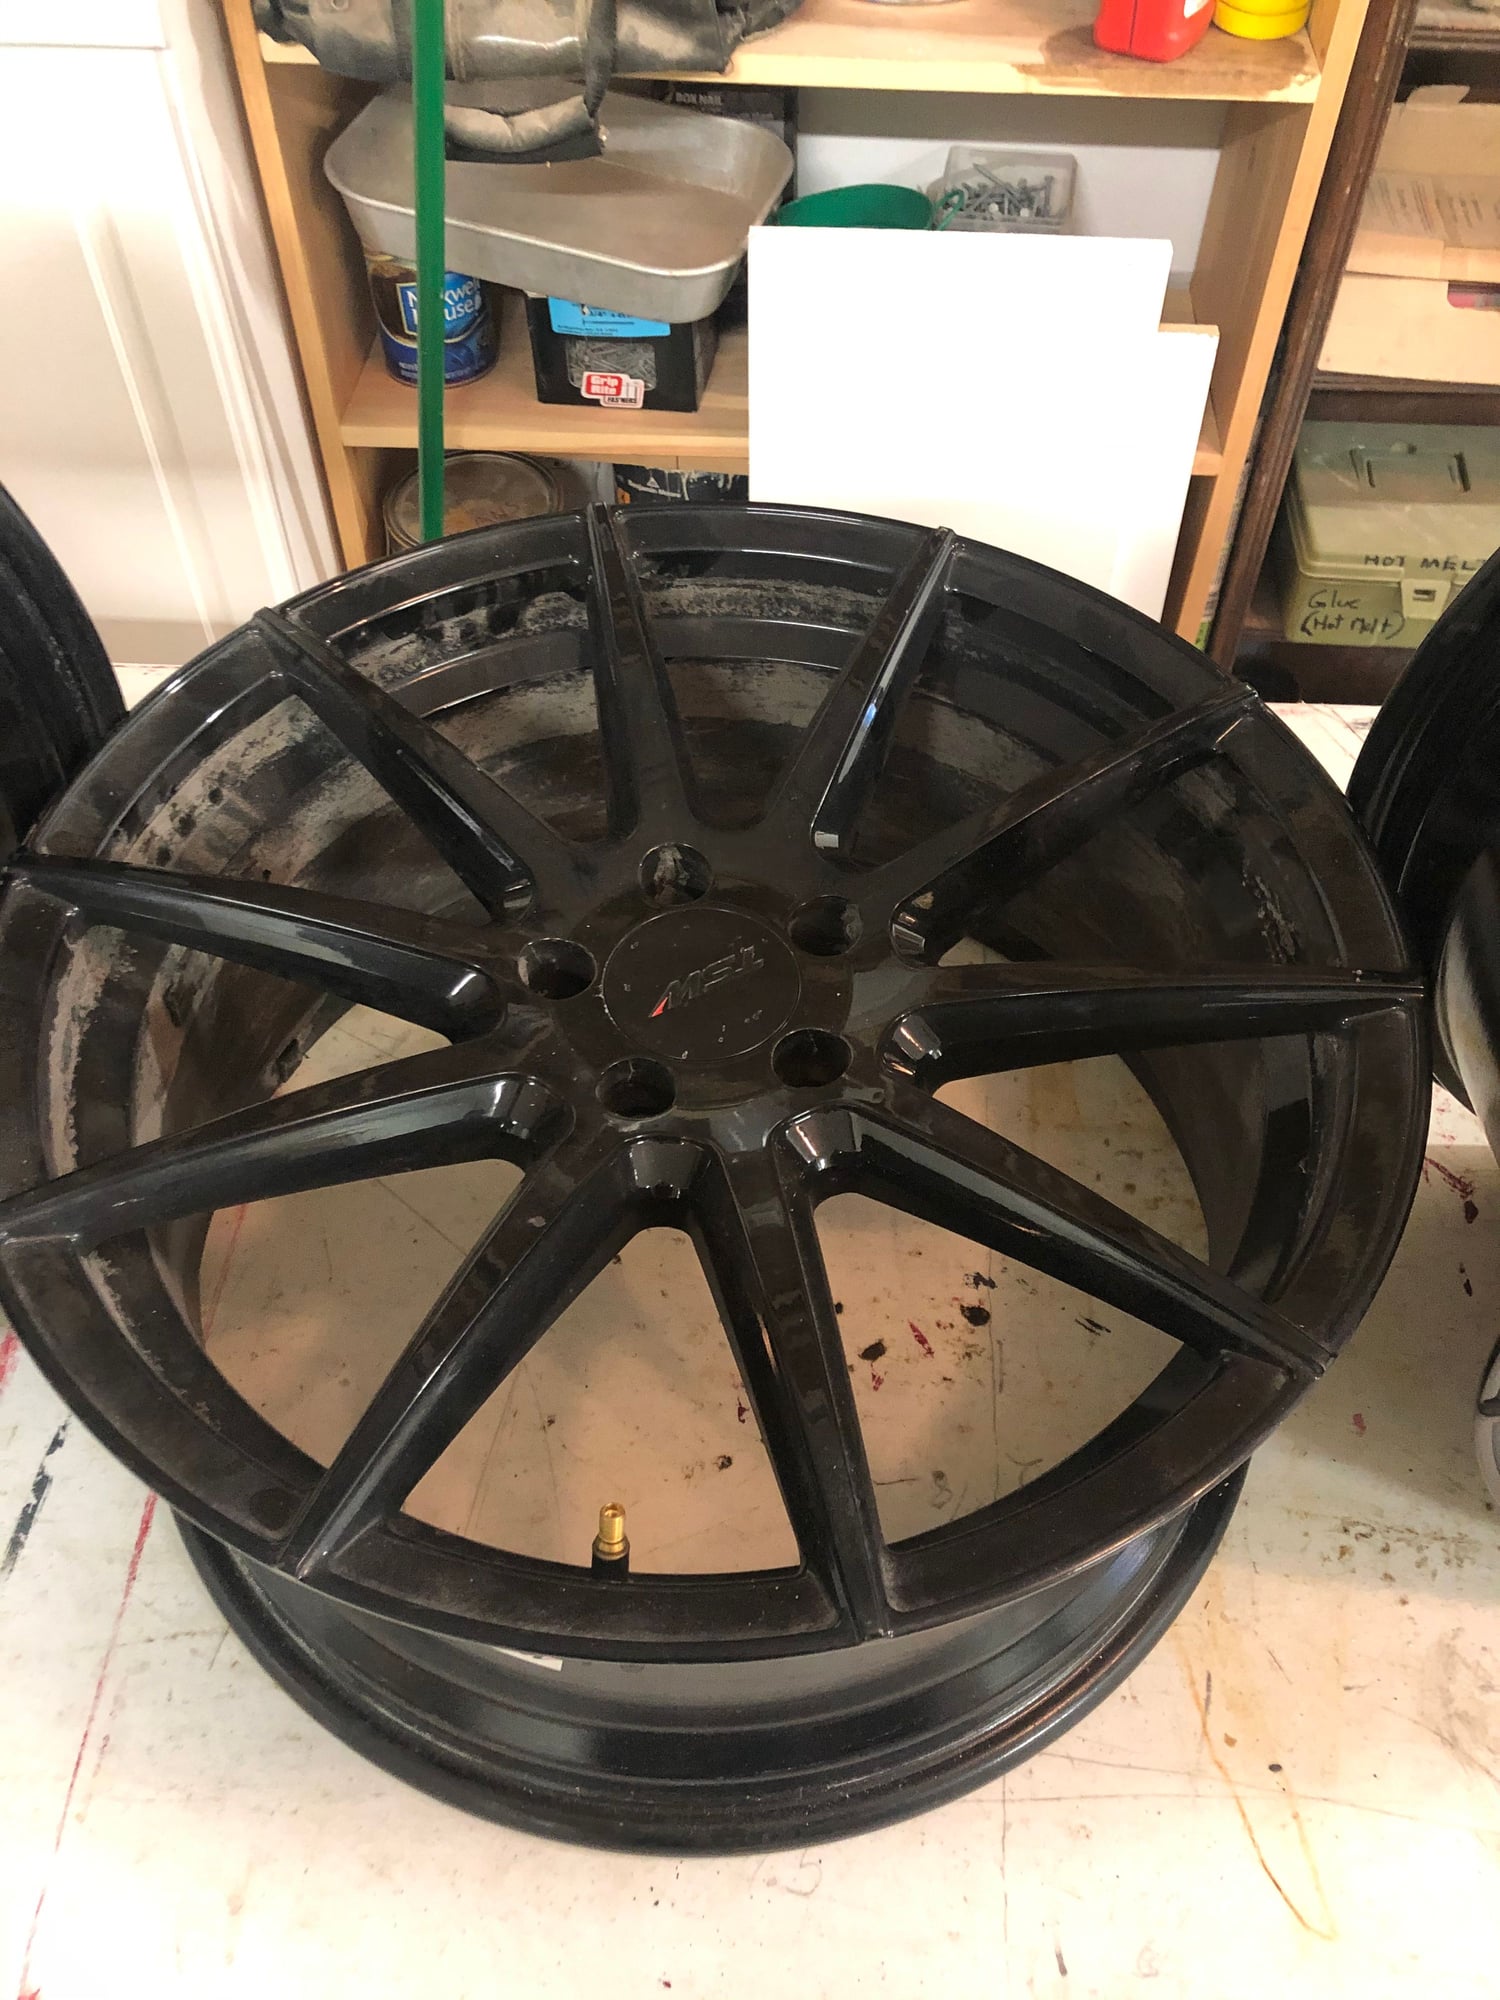 Wheels and Tires/Axles - Four 19” TSW Clypse wheels S550 - Used - 2014 to 2022 Mercedes-Benz S550 - Portland, ME 04103, United States